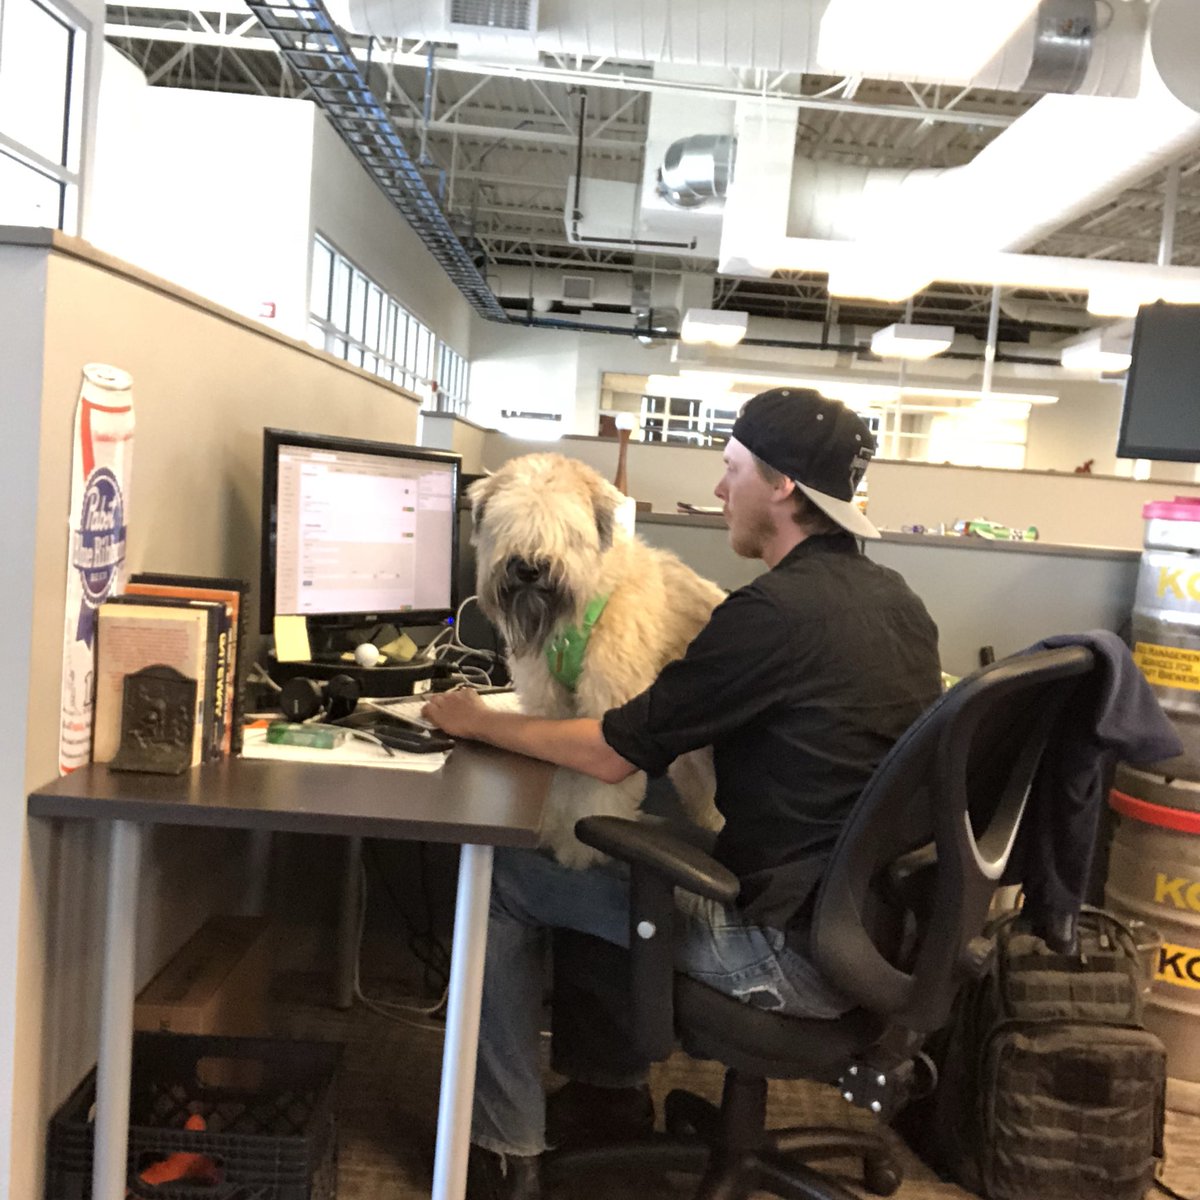 This is why everyone loves it when I come to the #office! #deskdog #lapdog #steadyserv
.
.
.

#wheatenterrier #wheatensofTwitter #wheatenlove #scwt #indywheatens #dogsoftwitter #meetinawheaten #goodboy #adventureswithted #ridiculousted